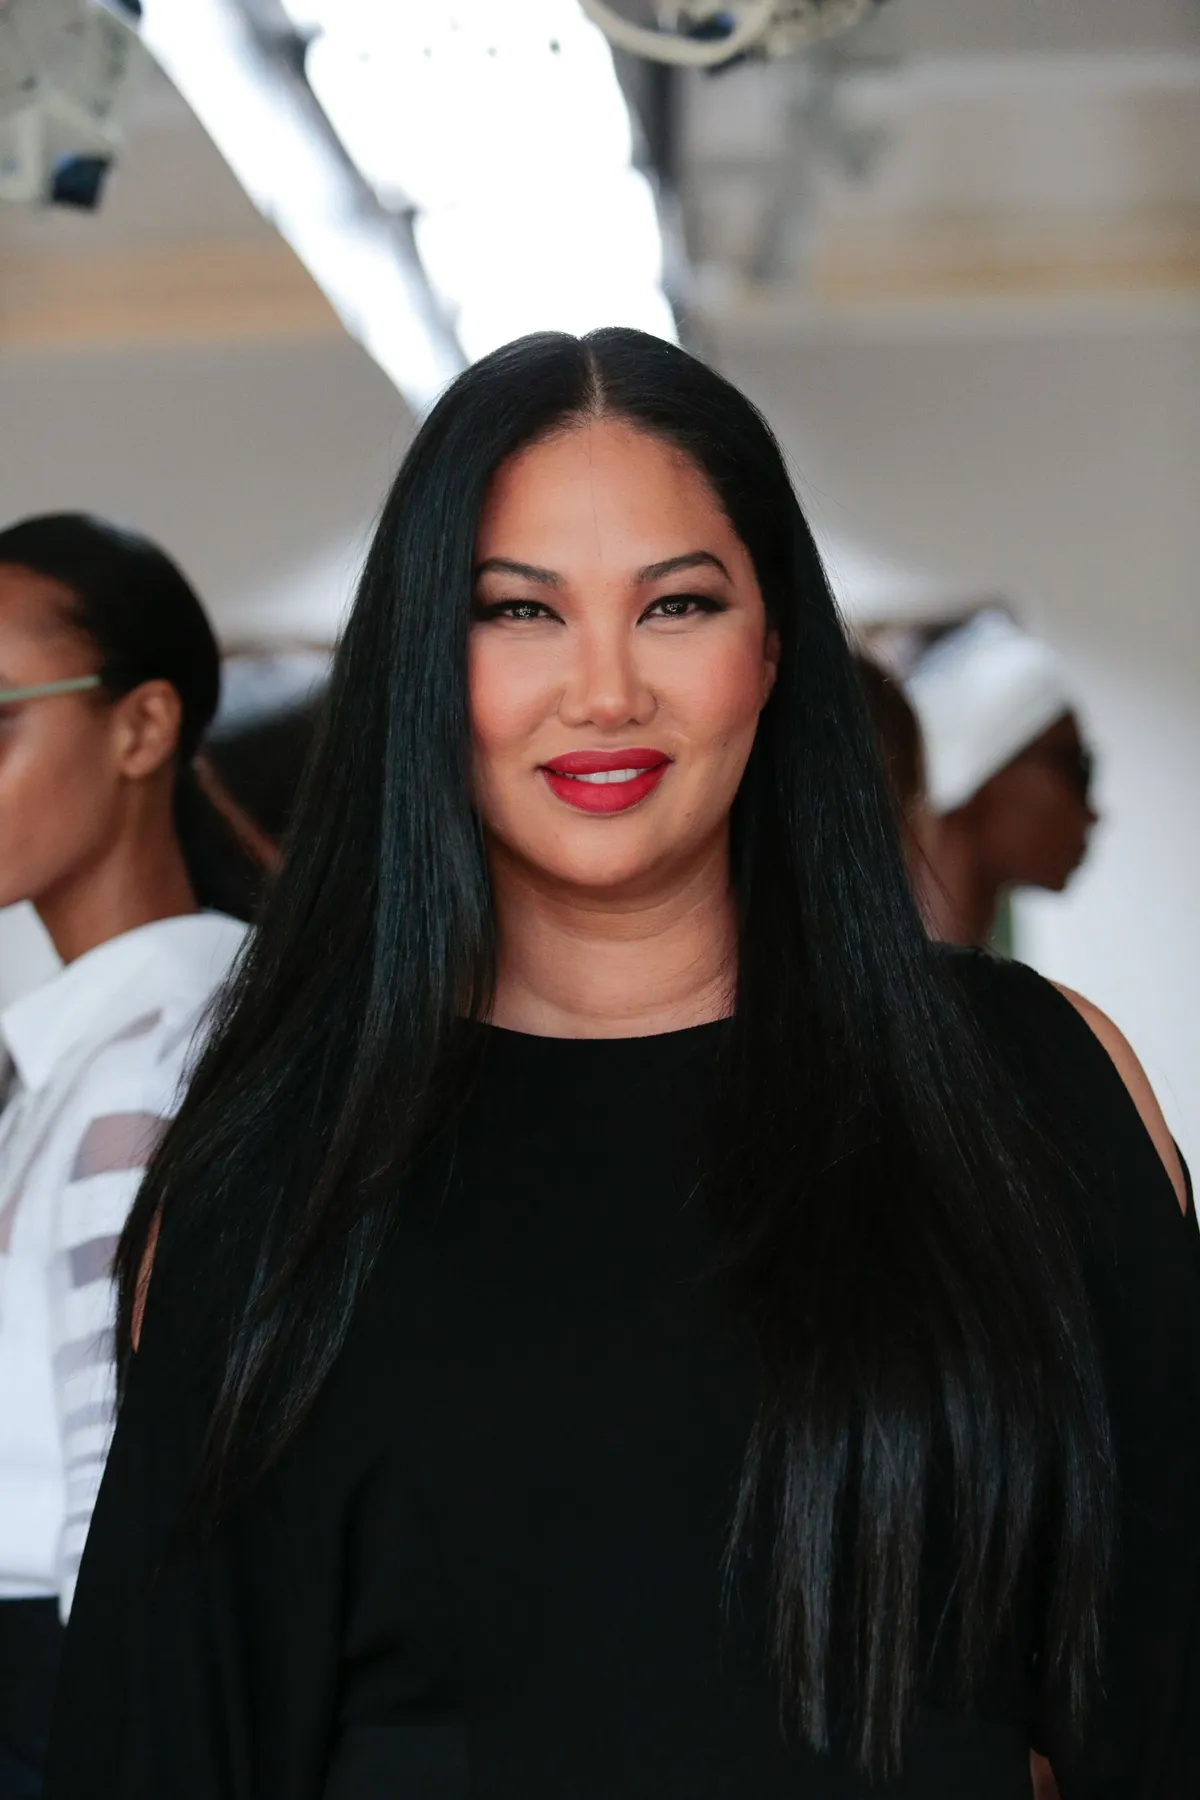 Kimora Lee Simmons during New York Fashion Week at The Gallery, Skylight at Clarkson Square on September 14, 2016. | Photo: Getty Images